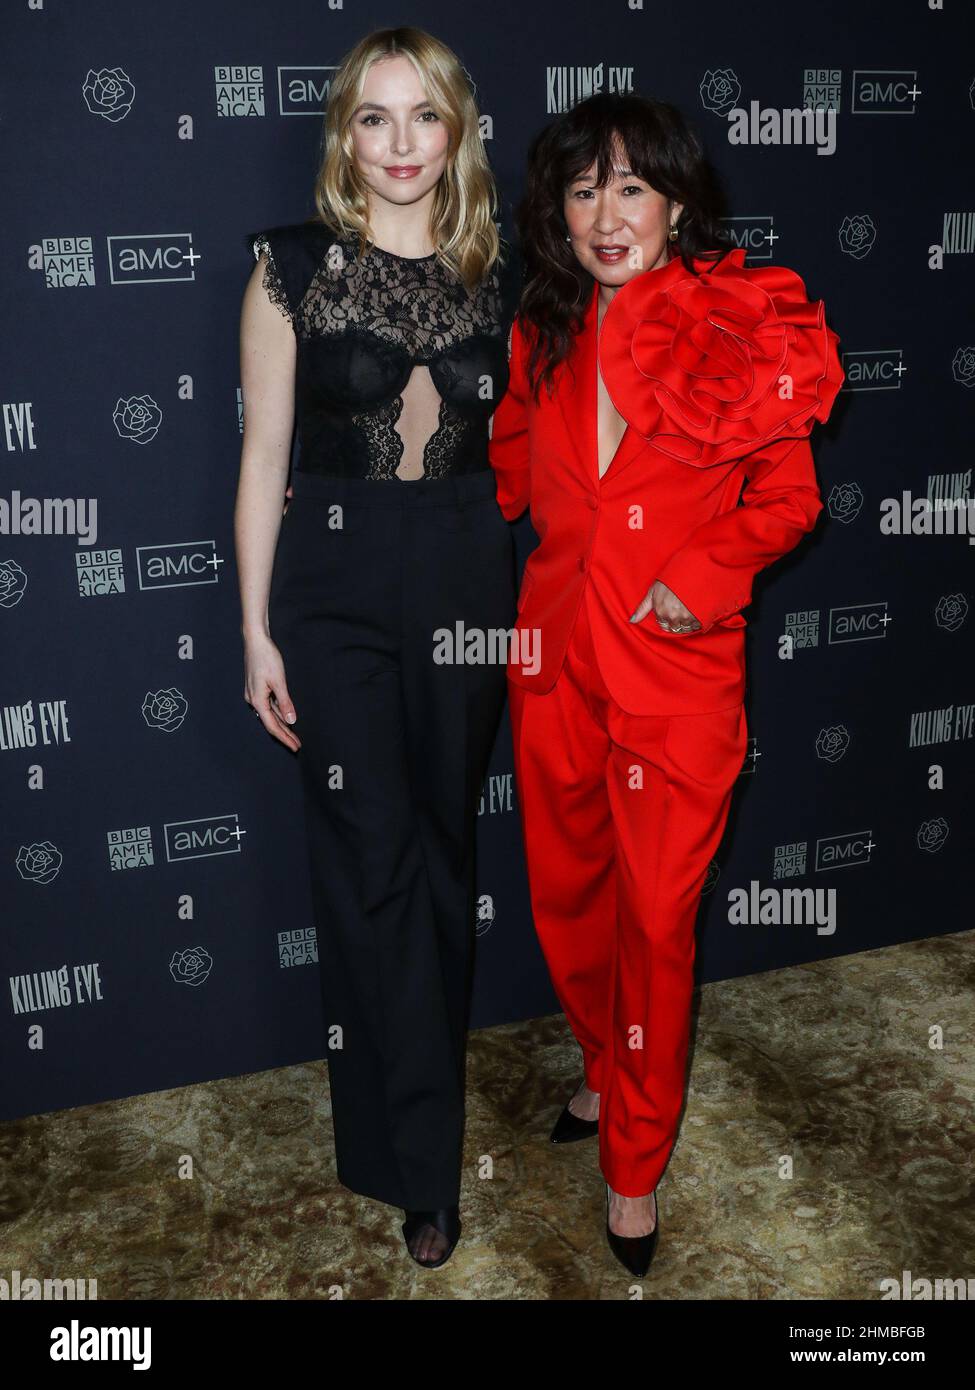 Beverly Hills, United States. 08th Feb, 2022. BEVERLY HILLS, LOS ANGELES, CALIFORNIA, USA - FEBRUARY 08: Actresses Jodie Comer and Sandra Oh attend the Photo Call For BBC's 'Killing Eve' Season Four which premieres on BBC AMERICA and AMC  on Sunday, February 27 held at the The Peninsula Beverly Hills Hotel on February 8, 2022 in Beverly Hills, Los Angeles, California, United States. (Photo by Xavier Collin/Image Press Agency) Credit: Image Press Agency/Alamy Live News Stock Photo